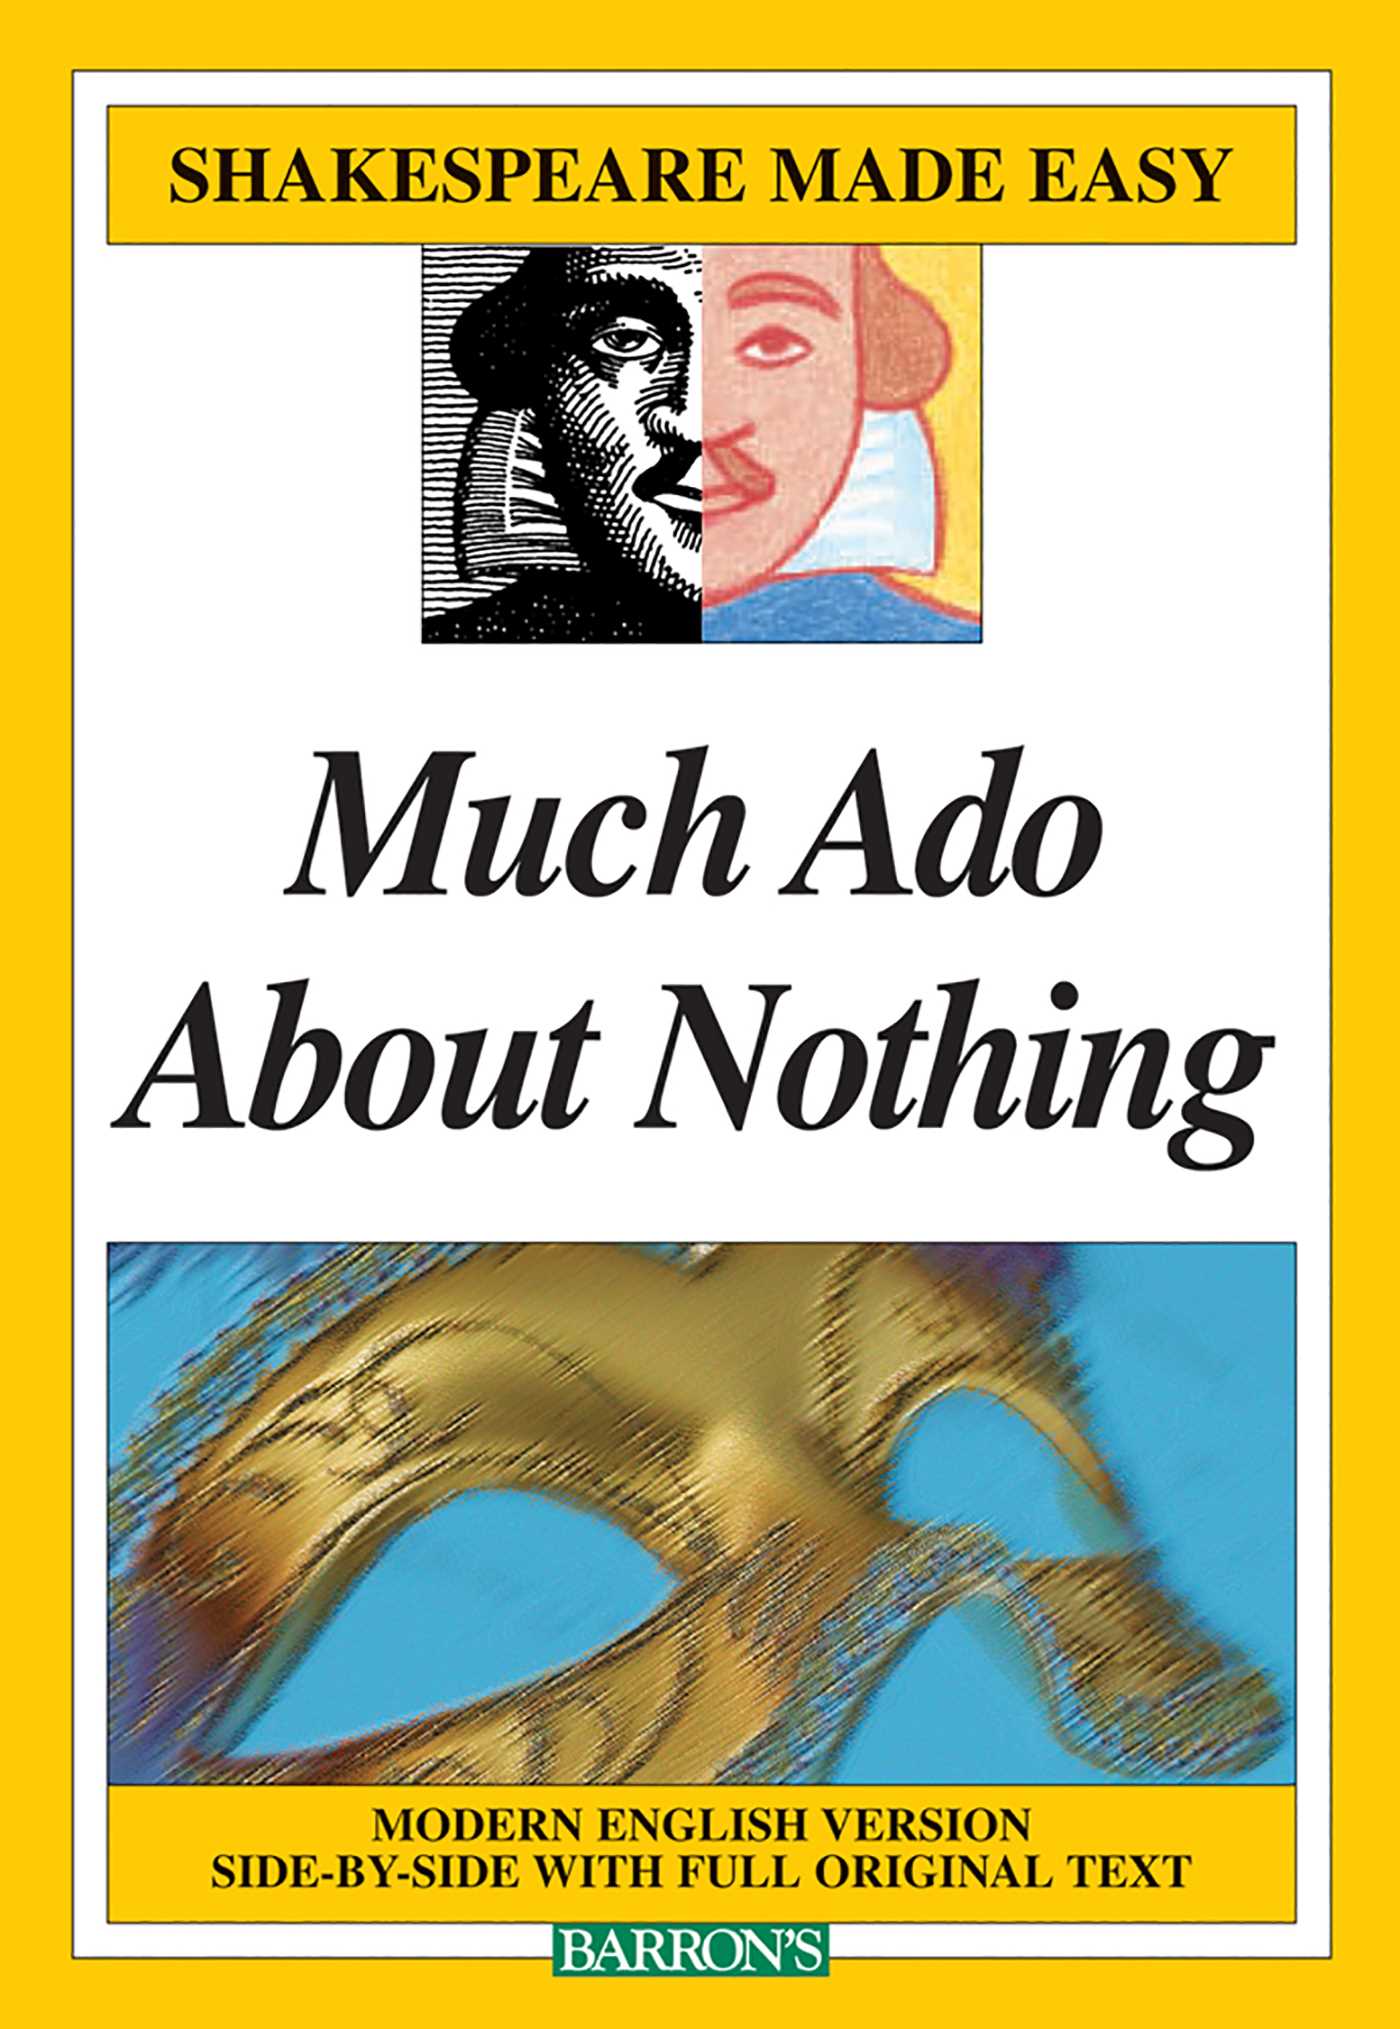 Shakespeare Made Easy: Much Ado About Nothing (Paperback) - image 2 of 2